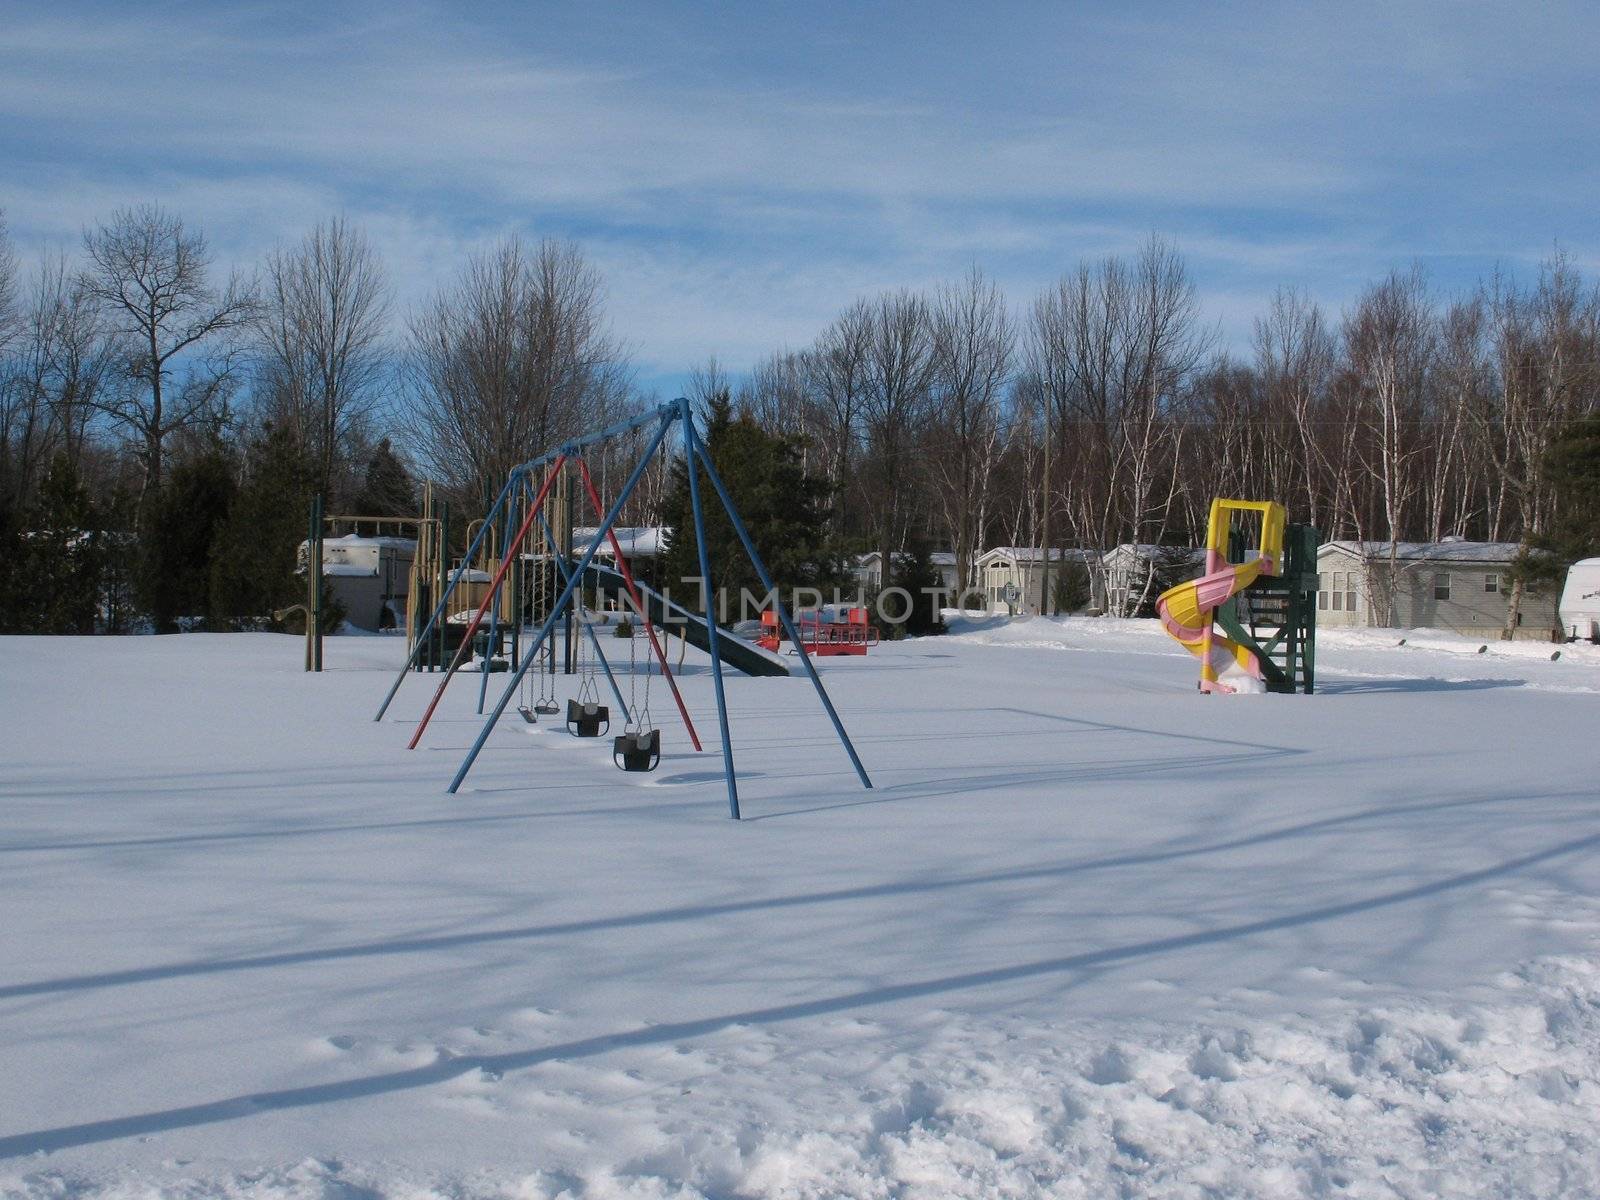 A Playground in Winter by namdlo